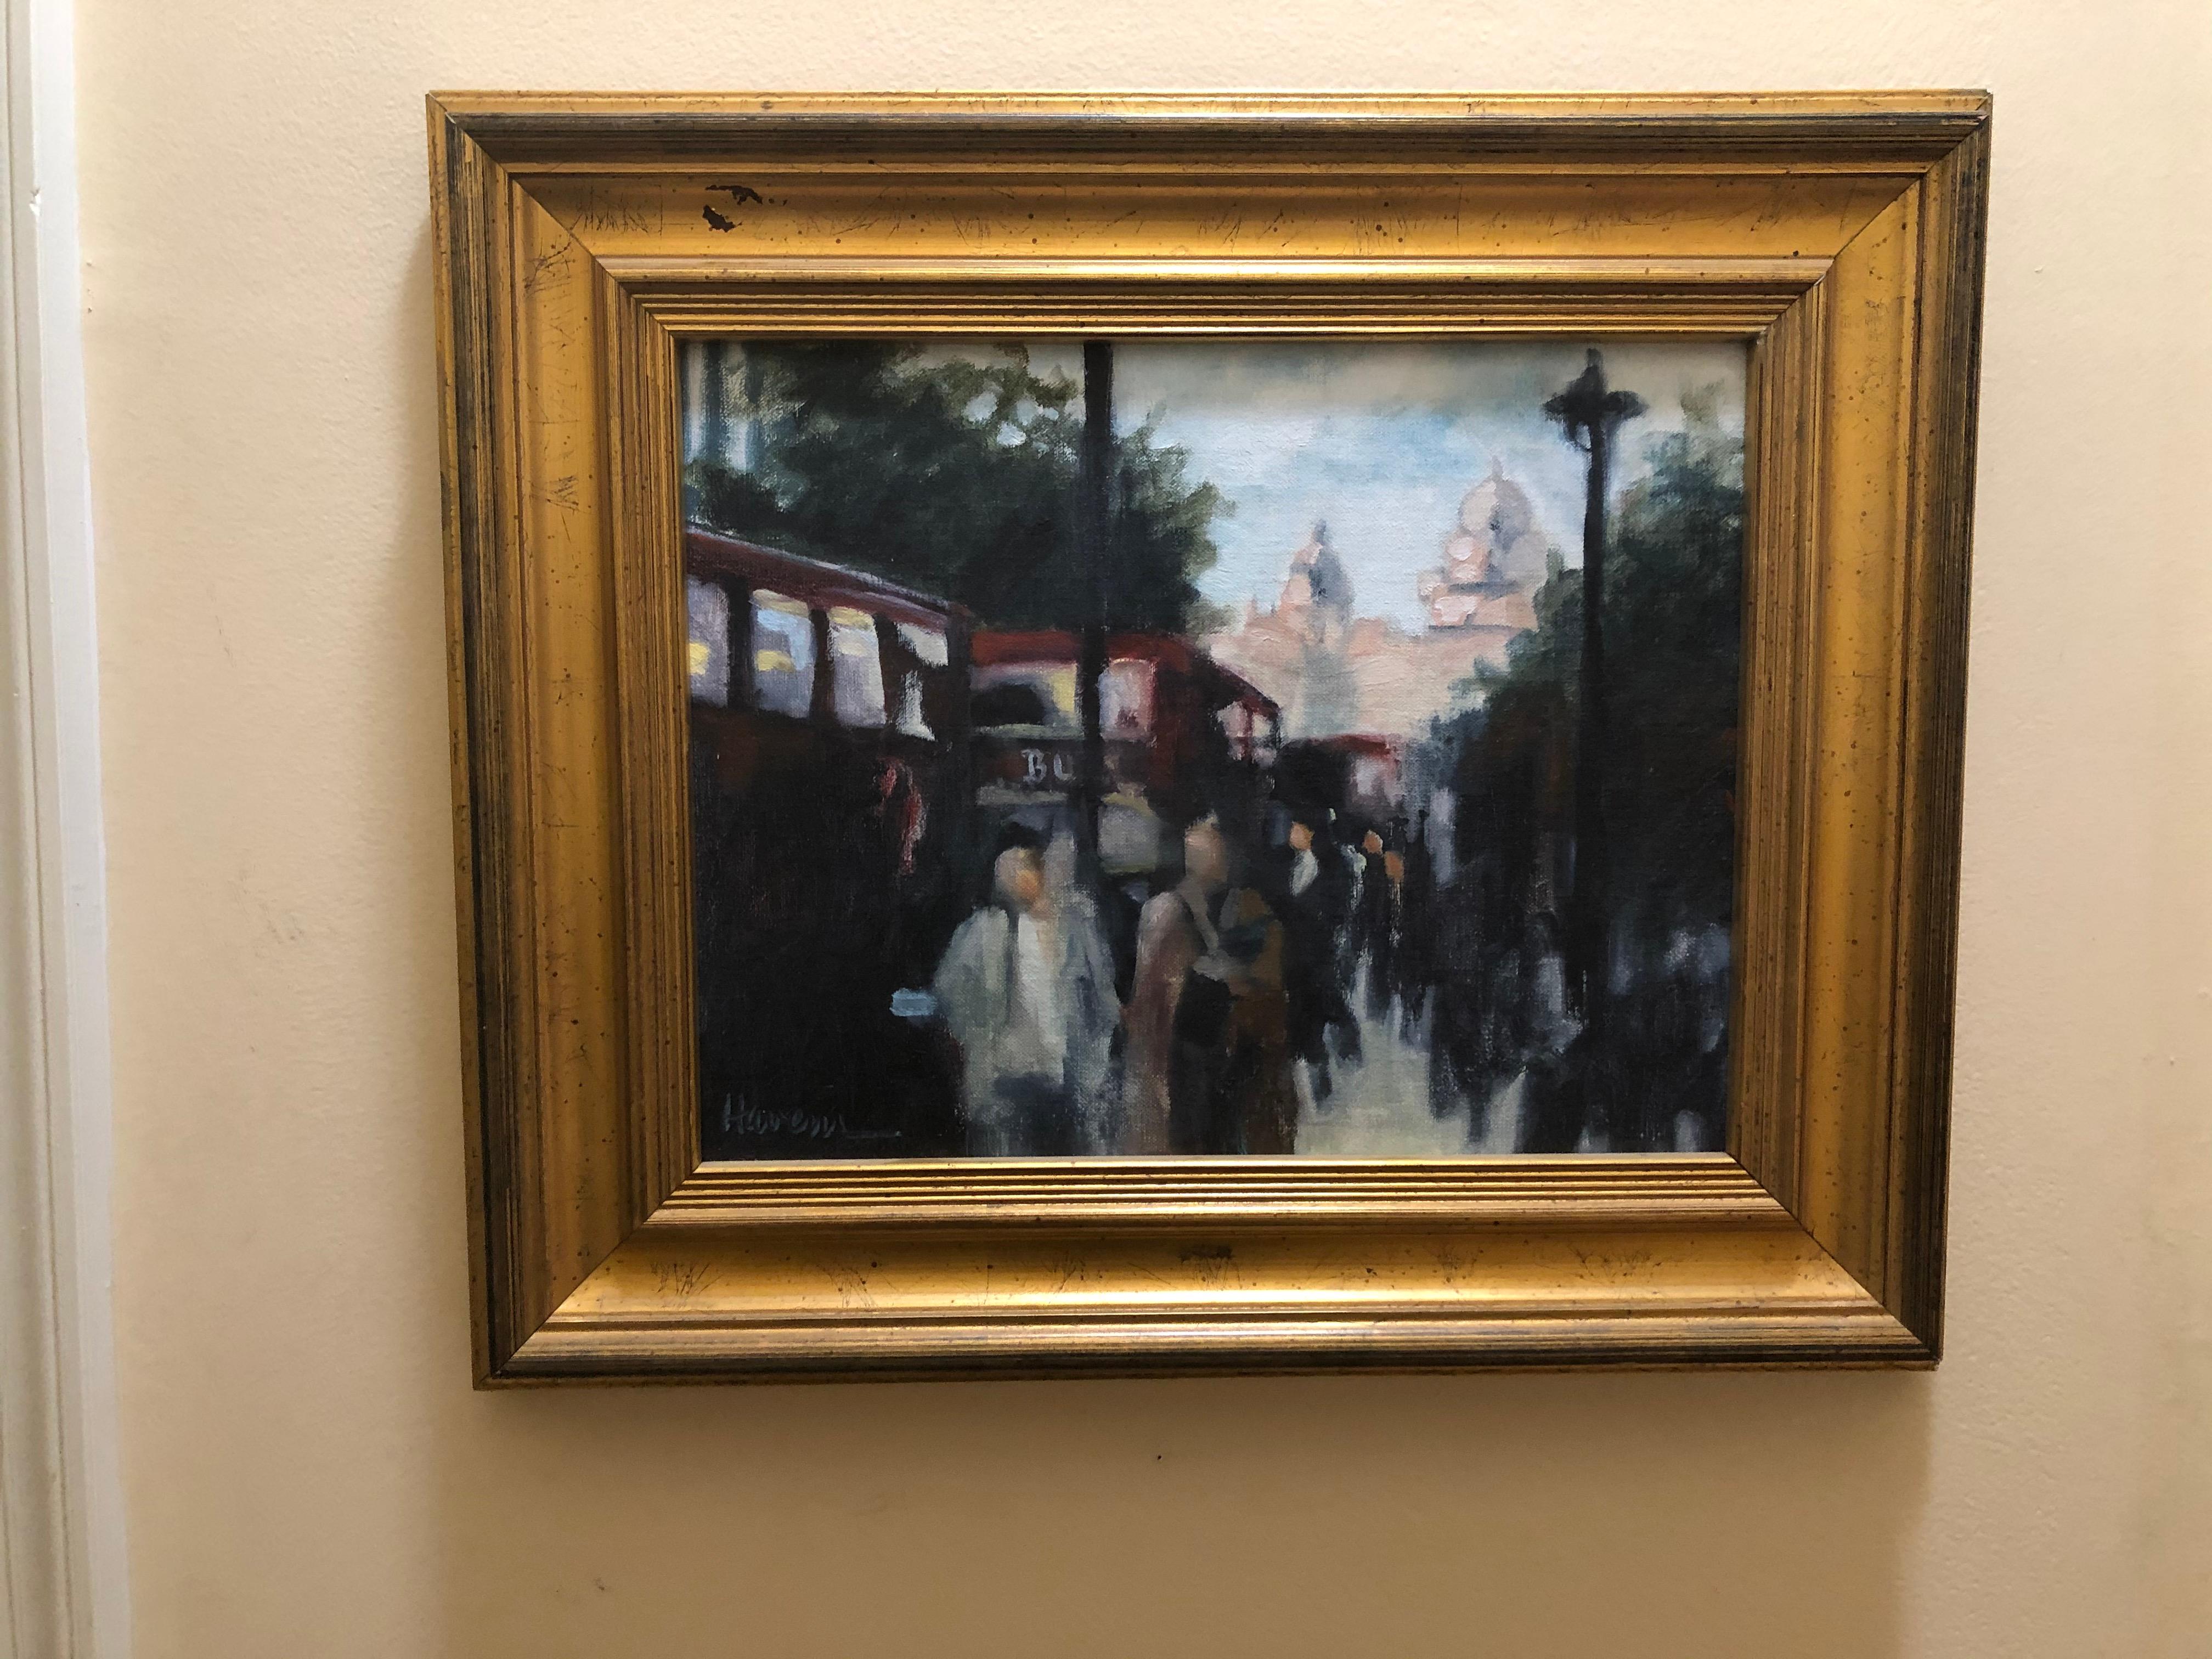 Bit of a mystery painting here. Nicely painted busy street English street scene, People and doubledecker buses moving along. It is signed, possibly Harem? It is an oil on board measuring 14 inches wide by 11 high. Frame is 20 inches by 17.